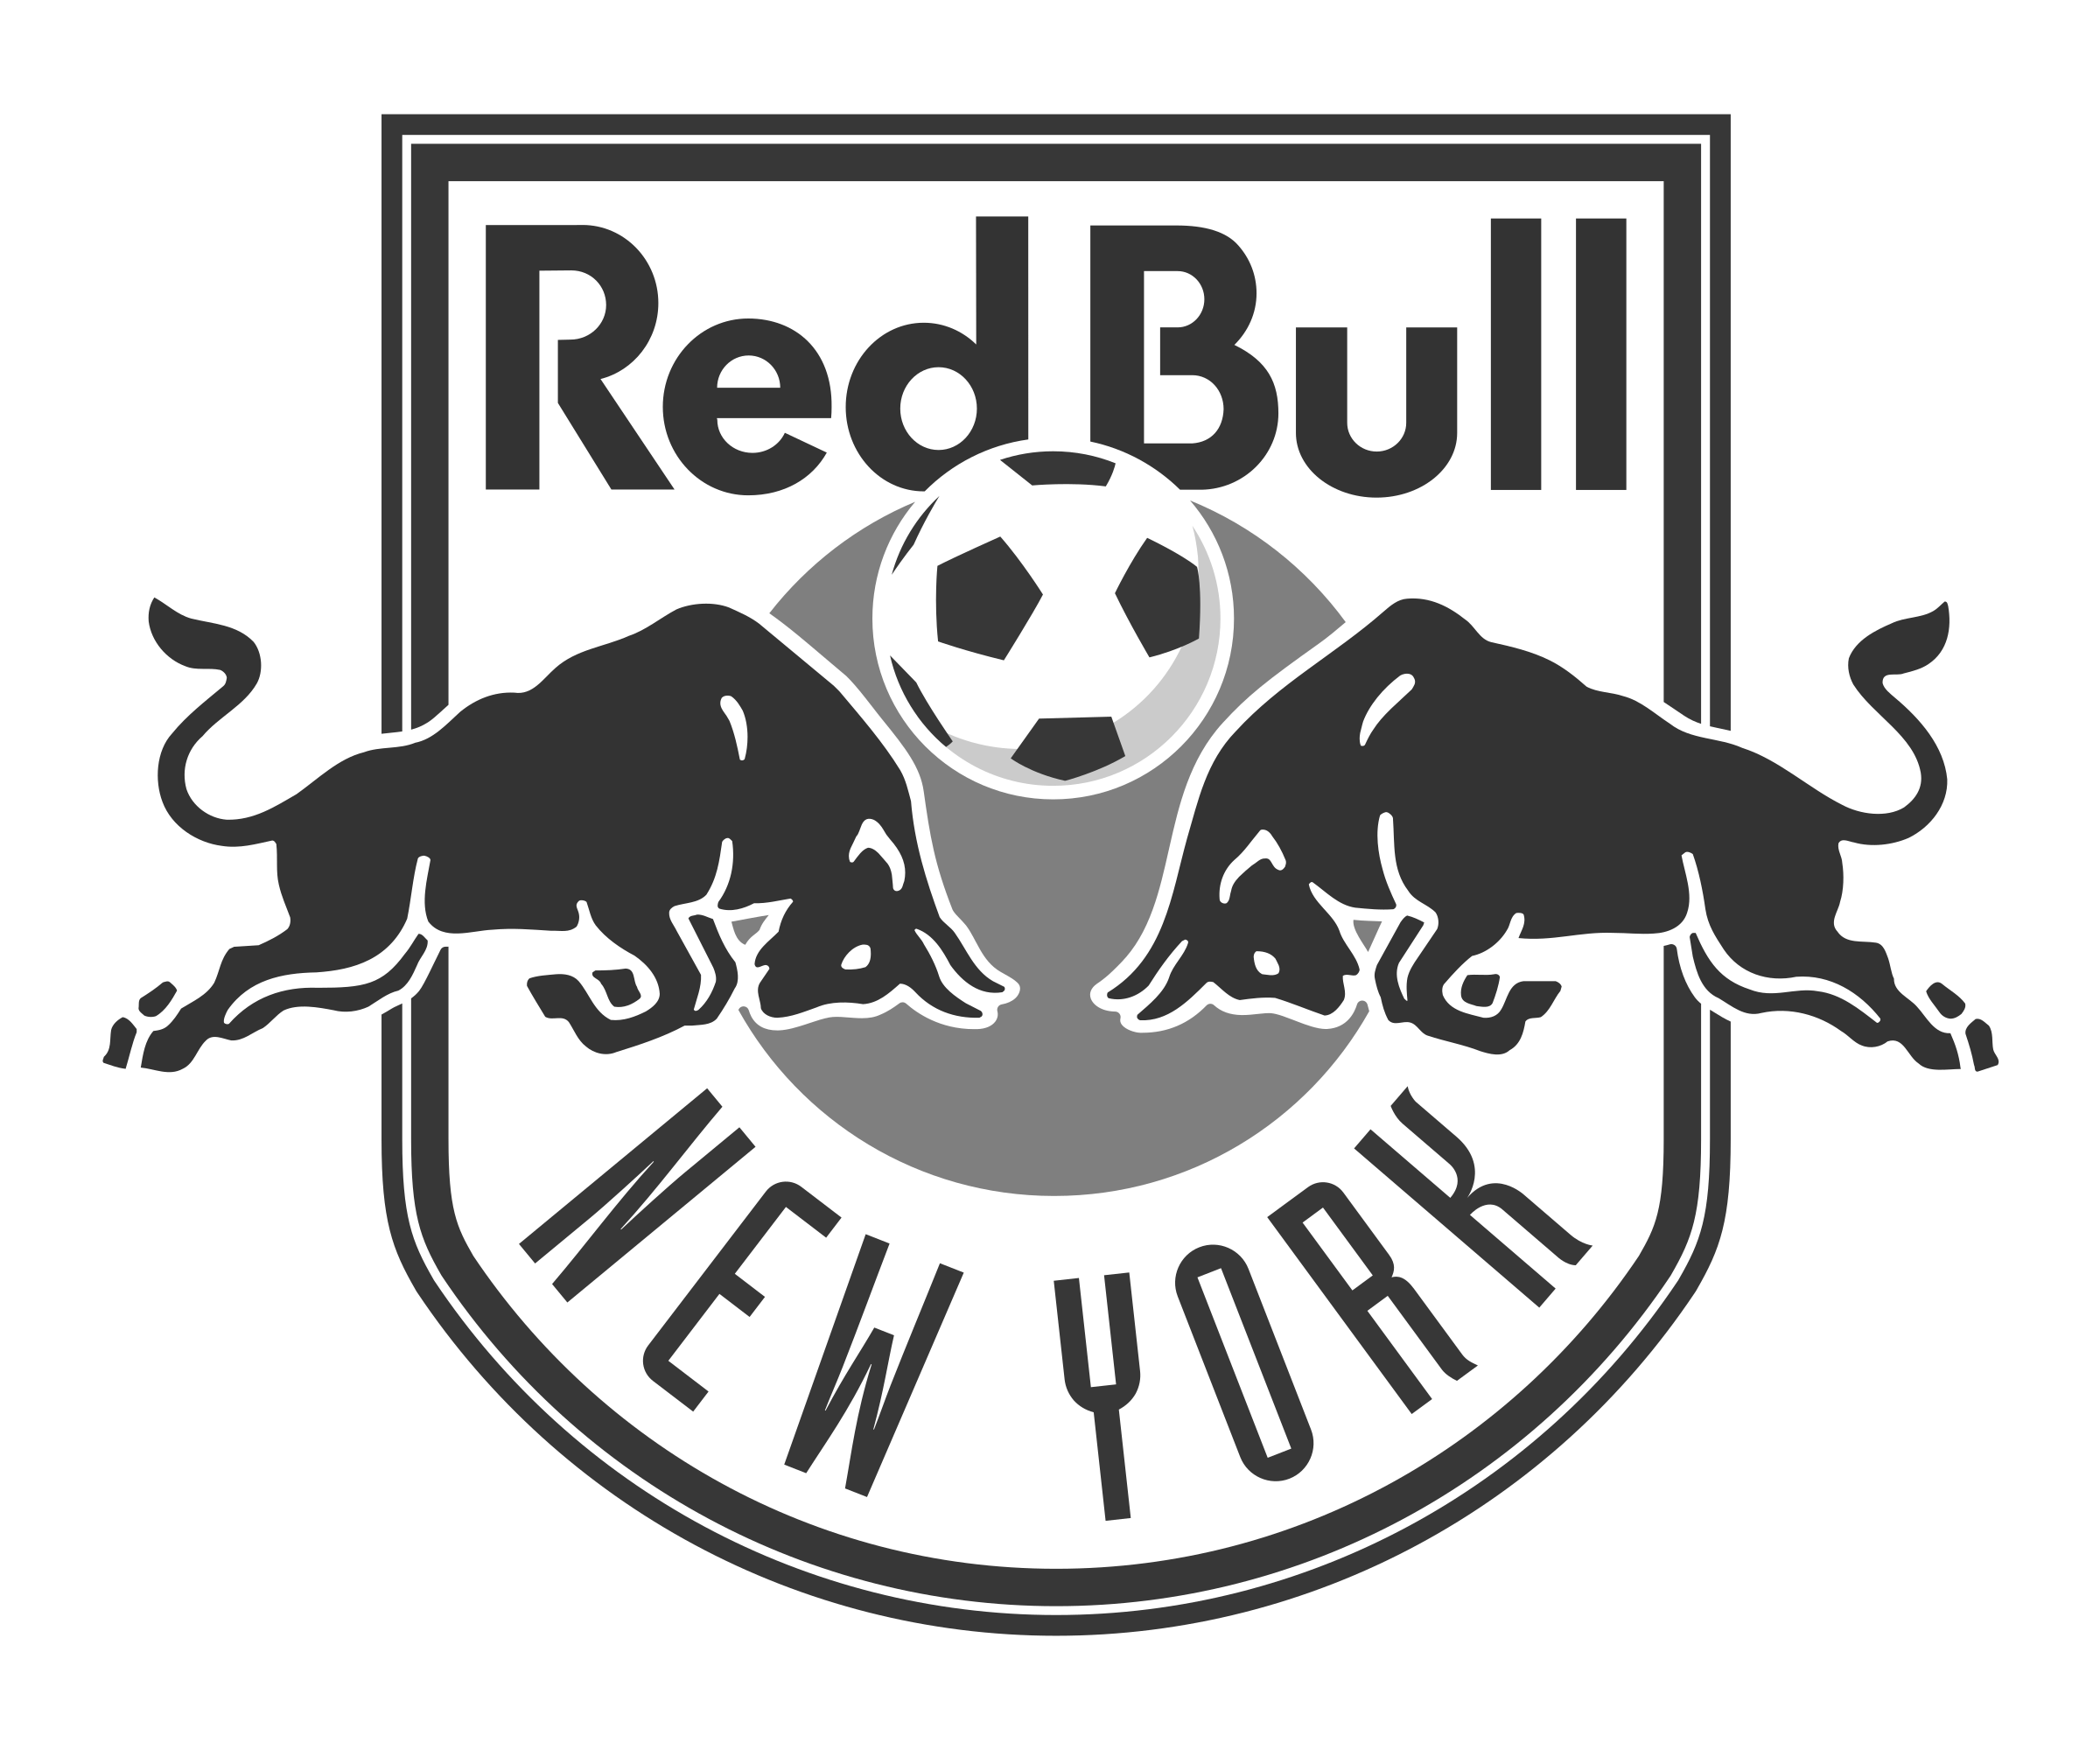 Black White and Red Bull Logo - New York Red Bulls Logo PNG Transparent & SVG Vector - Freebie Supply